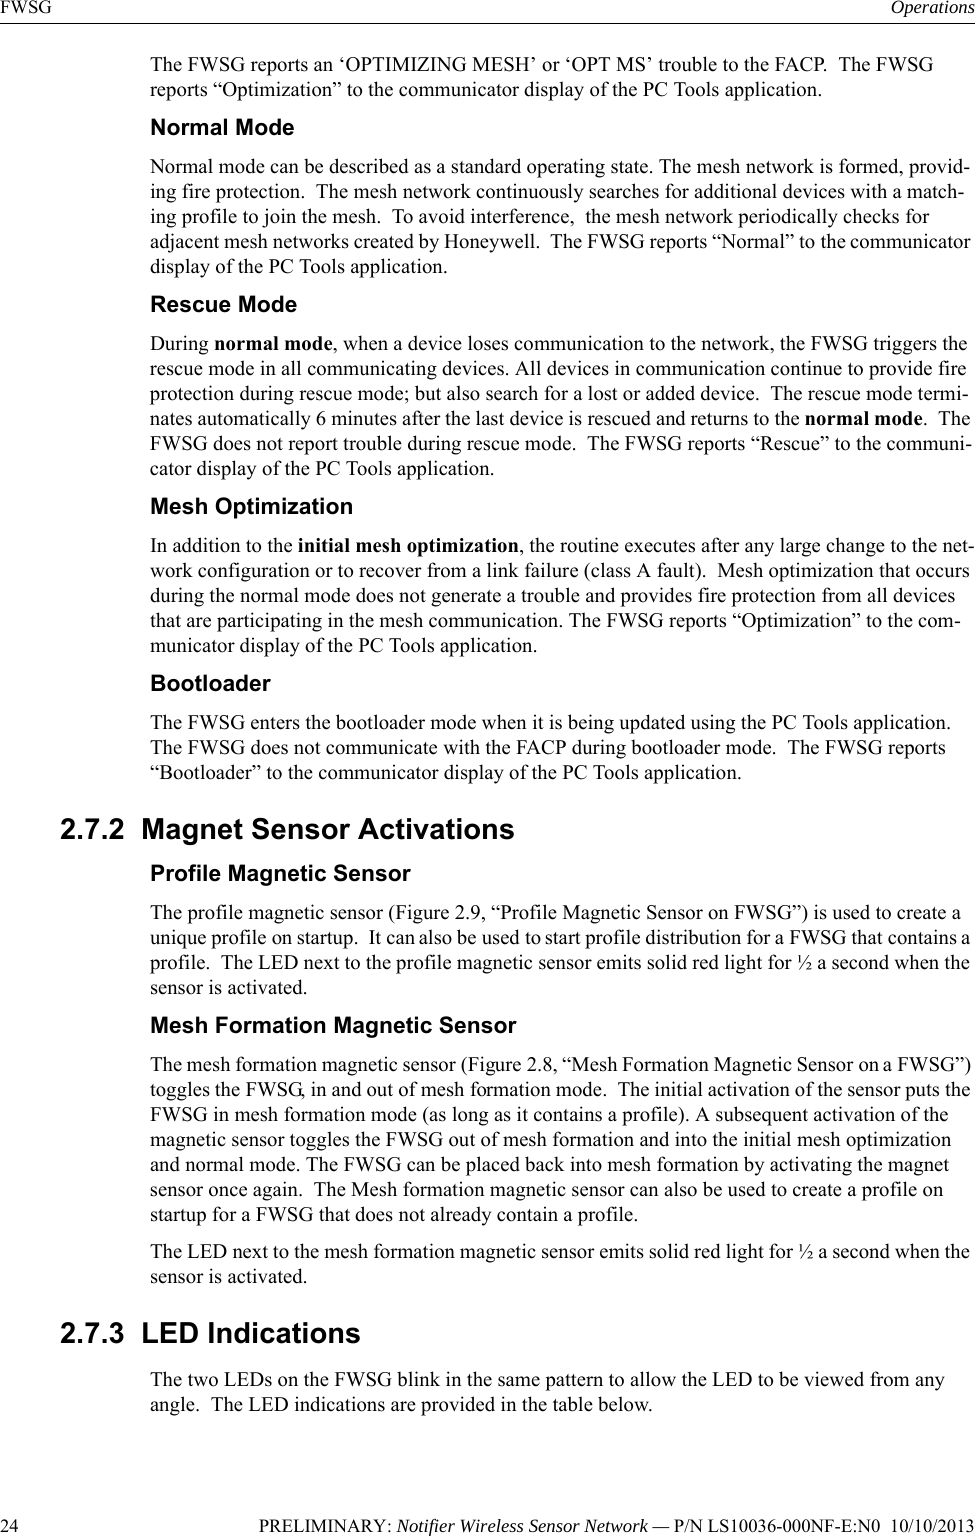 24 PRELIMINARY: Notifier Wireless Sensor Network — P/N LS10036-000NF-E:N0  10/10/2013FWSG OperationsThe FWSG reports an ‘OPTIMIZING MESH’ or ‘OPT MS’ trouble to the FACP.  The FWSG reports “Optimization” to the communicator display of the PC Tools application.Normal ModeNormal mode can be described as a standard operating state. The mesh network is formed, provid-ing fire protection.  The mesh network continuously searches for additional devices with a match-ing profile to join the mesh.  To avoid interference,  the mesh network periodically checks for adjacent mesh networks created by Honeywell.  The FWSG reports “Normal” to the communicator display of the PC Tools application.Rescue ModeDuring normal mode, when a device loses communication to the network, the FWSG triggers the rescue mode in all communicating devices. All devices in communication continue to provide fire protection during rescue mode; but also search for a lost or added device.  The rescue mode termi-nates automatically 6 minutes after the last device is rescued and returns to the normal mode.  The FWSG does not report trouble during rescue mode.  The FWSG reports “Rescue” to the communi-cator display of the PC Tools application.Mesh OptimizationIn addition to the initial mesh optimization, the routine executes after any large change to the net-work configuration or to recover from a link failure (class A fault).  Mesh optimization that occurs during the normal mode does not generate a trouble and provides fire protection from all devices that are participating in the mesh communication. The FWSG reports “Optimization” to the com-municator display of the PC Tools application.BootloaderThe FWSG enters the bootloader mode when it is being updated using the PC Tools application.  The FWSG does not communicate with the FACP during bootloader mode.  The FWSG reports “Bootloader” to the communicator display of the PC Tools application.2.7.2  Magnet Sensor ActivationsProfile Magnetic SensorThe profile magnetic sensor (Figure 2.9, “Profile Magnetic Sensor on FWSG”) is used to create a unique profile on startup.  It can also be used to start profile distribution for a FWSG that contains a profile.  The LED next to the profile magnetic sensor emits solid red light for ½ a second when the sensor is activated.Mesh Formation Magnetic SensorThe mesh formation magnetic sensor (Figure 2.8, “Mesh Formation Magnetic Sensor on a FWSG”) toggles the FWSG, in and out of mesh formation mode.  The initial activation of the sensor puts the FWSG in mesh formation mode (as long as it contains a profile). A subsequent activation of the magnetic sensor toggles the FWSG out of mesh formation and into the initial mesh optimization and normal mode. The FWSG can be placed back into mesh formation by activating the magnet sensor once again.  The Mesh formation magnetic sensor can also be used to create a profile on startup for a FWSG that does not already contain a profile.The LED next to the mesh formation magnetic sensor emits solid red light for ½ a second when the sensor is activated. 2.7.3  LED IndicationsThe two LEDs on the FWSG blink in the same pattern to allow the LED to be viewed from any angle.  The LED indications are provided in the table below.